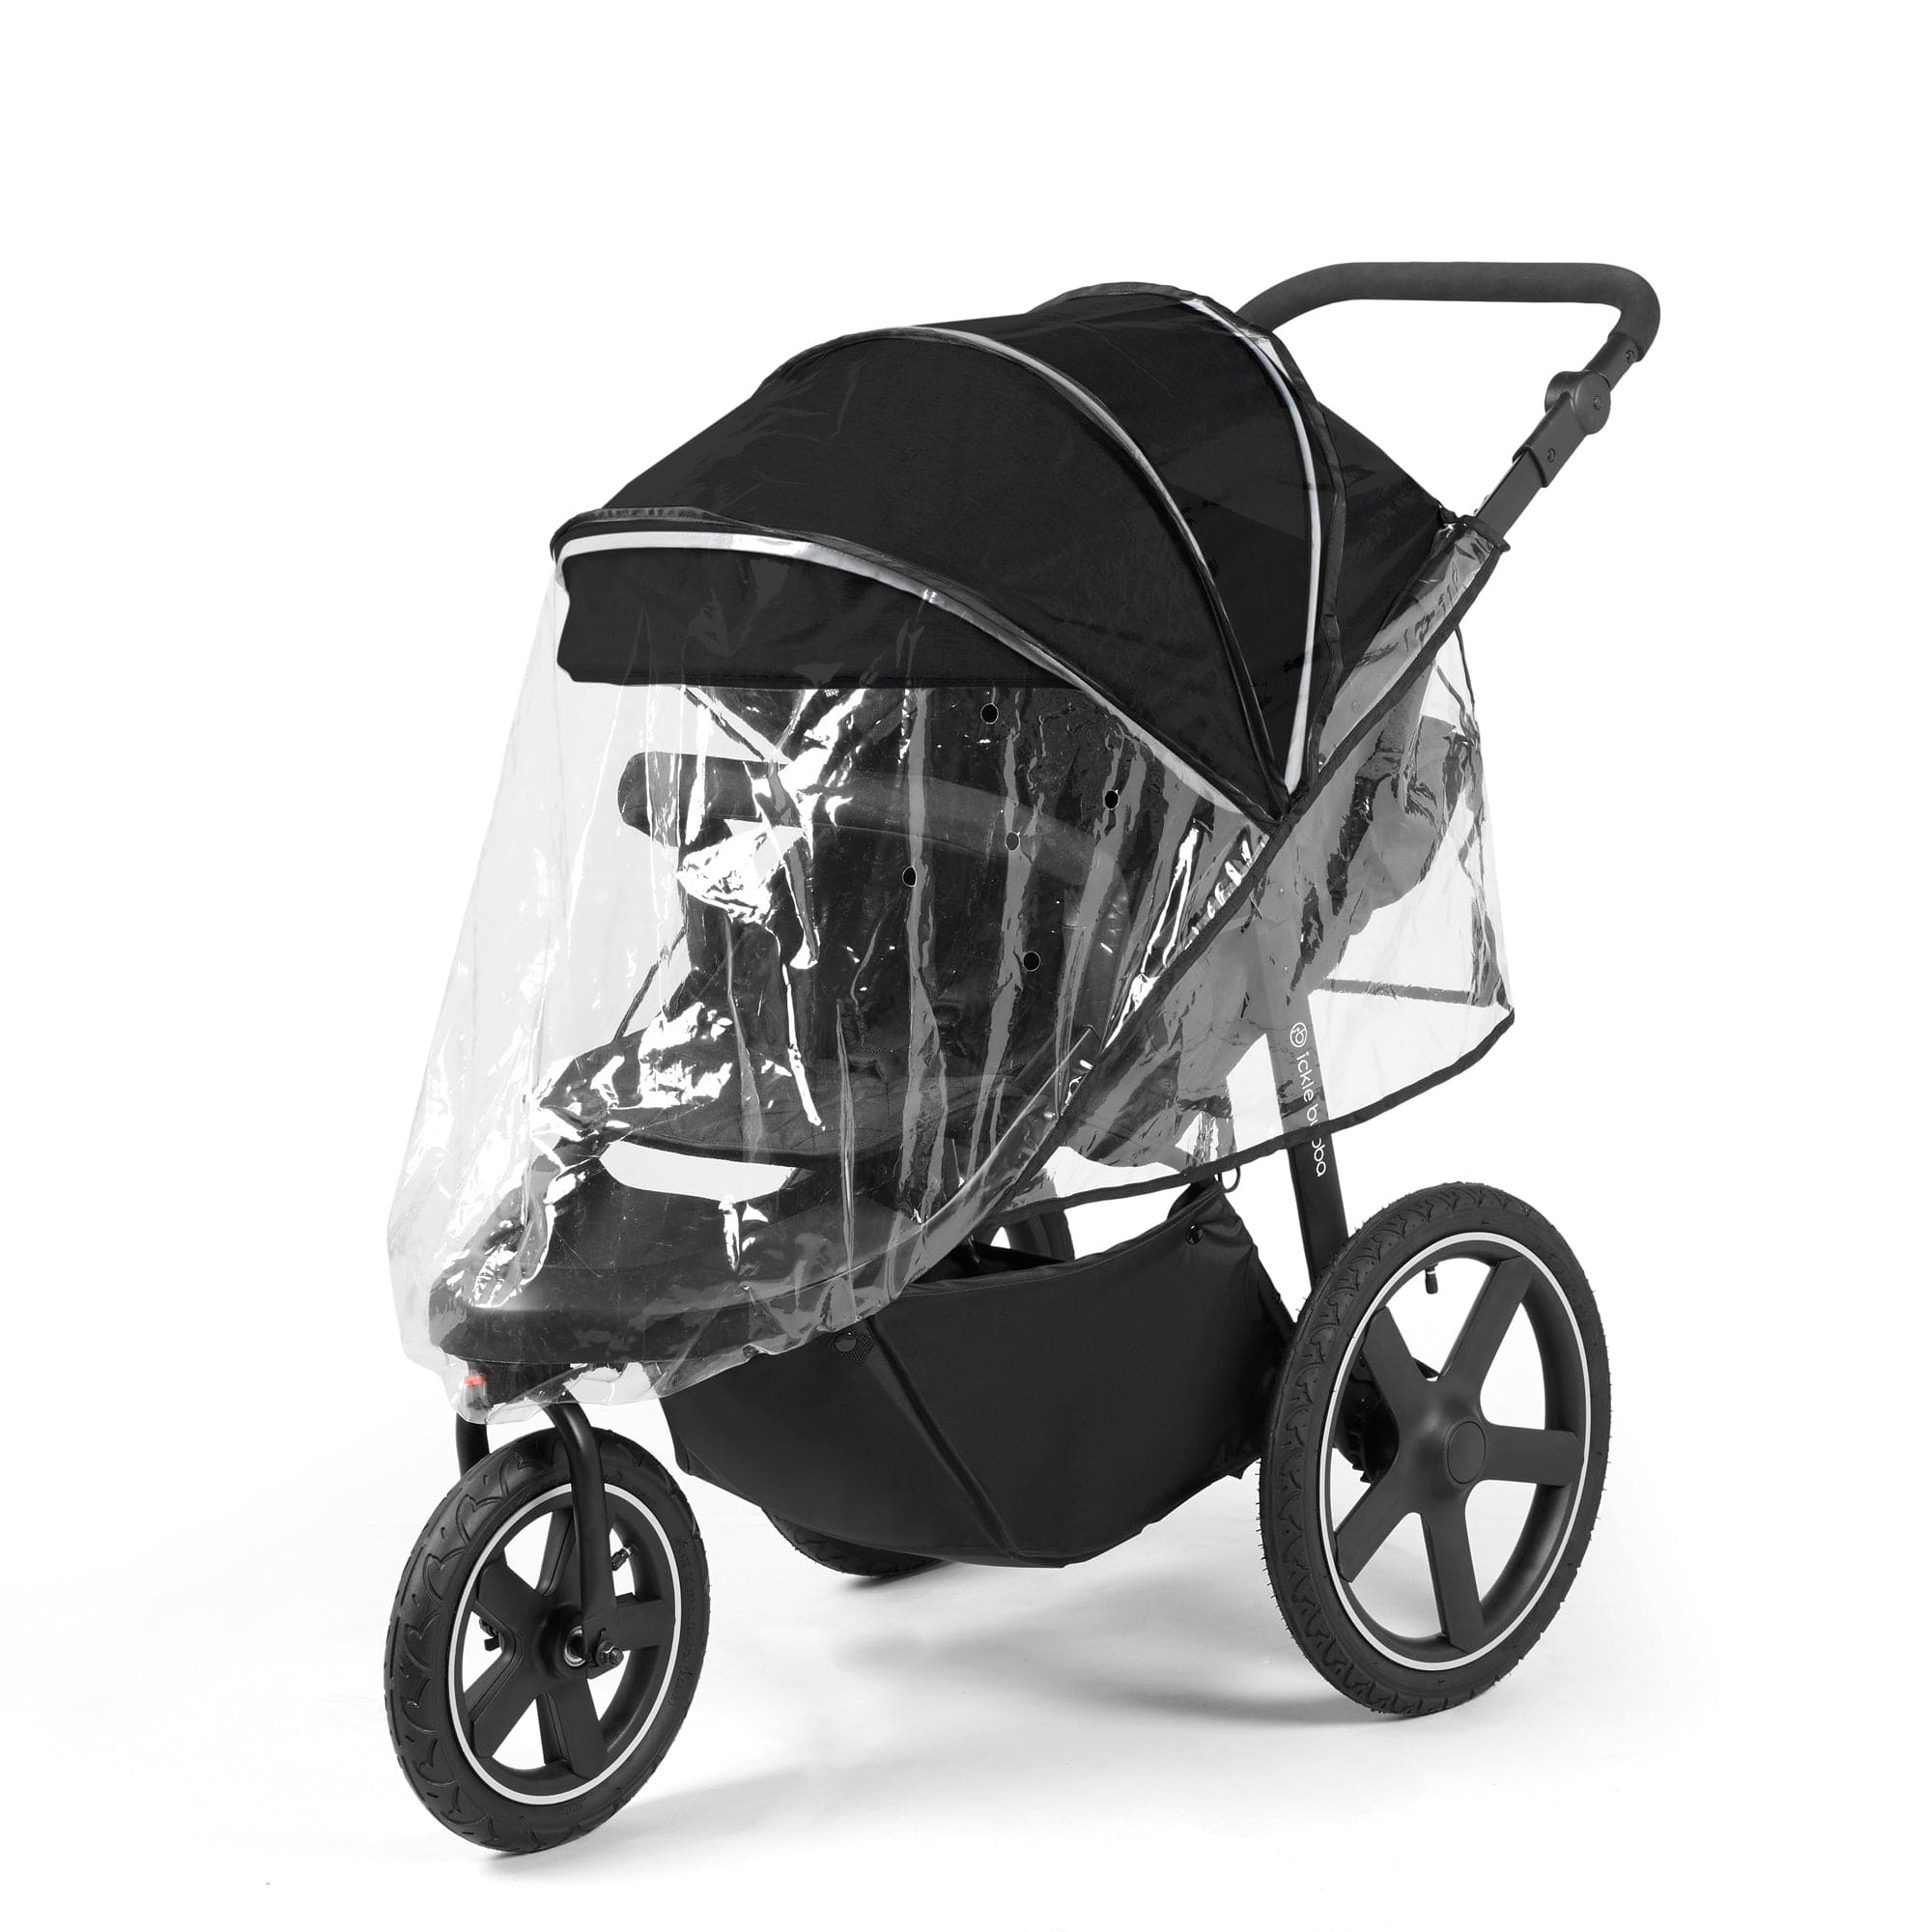 Ickle Bubba Venus Max Jogger Stroller I-Size Travel System in Black/Black with Isofix Base 3 Wheelers 13-004-500-001 5056515033632